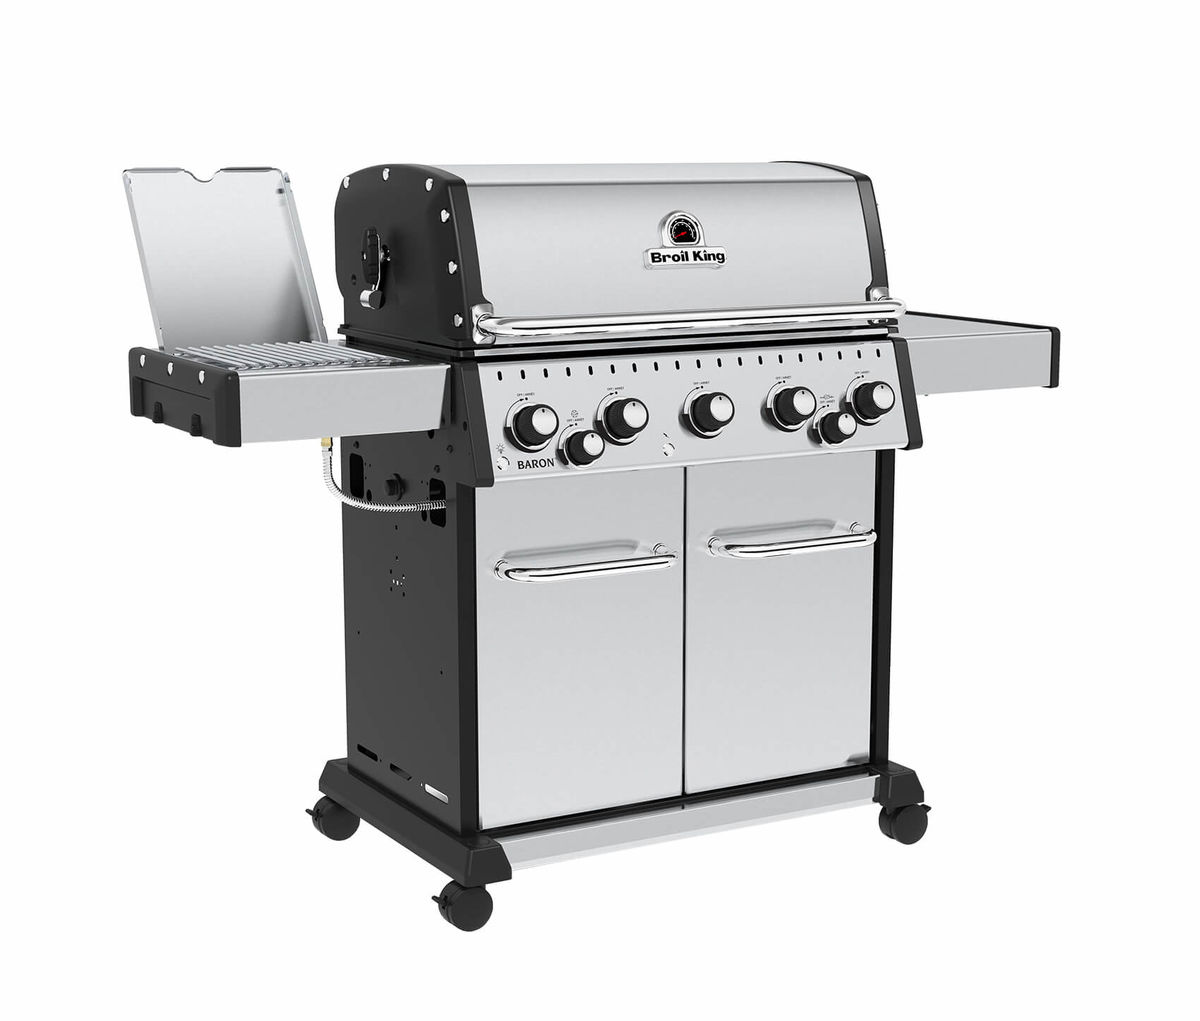 Image of Broil King Baron S 590 IR Gasgrill bei nettoshop.ch